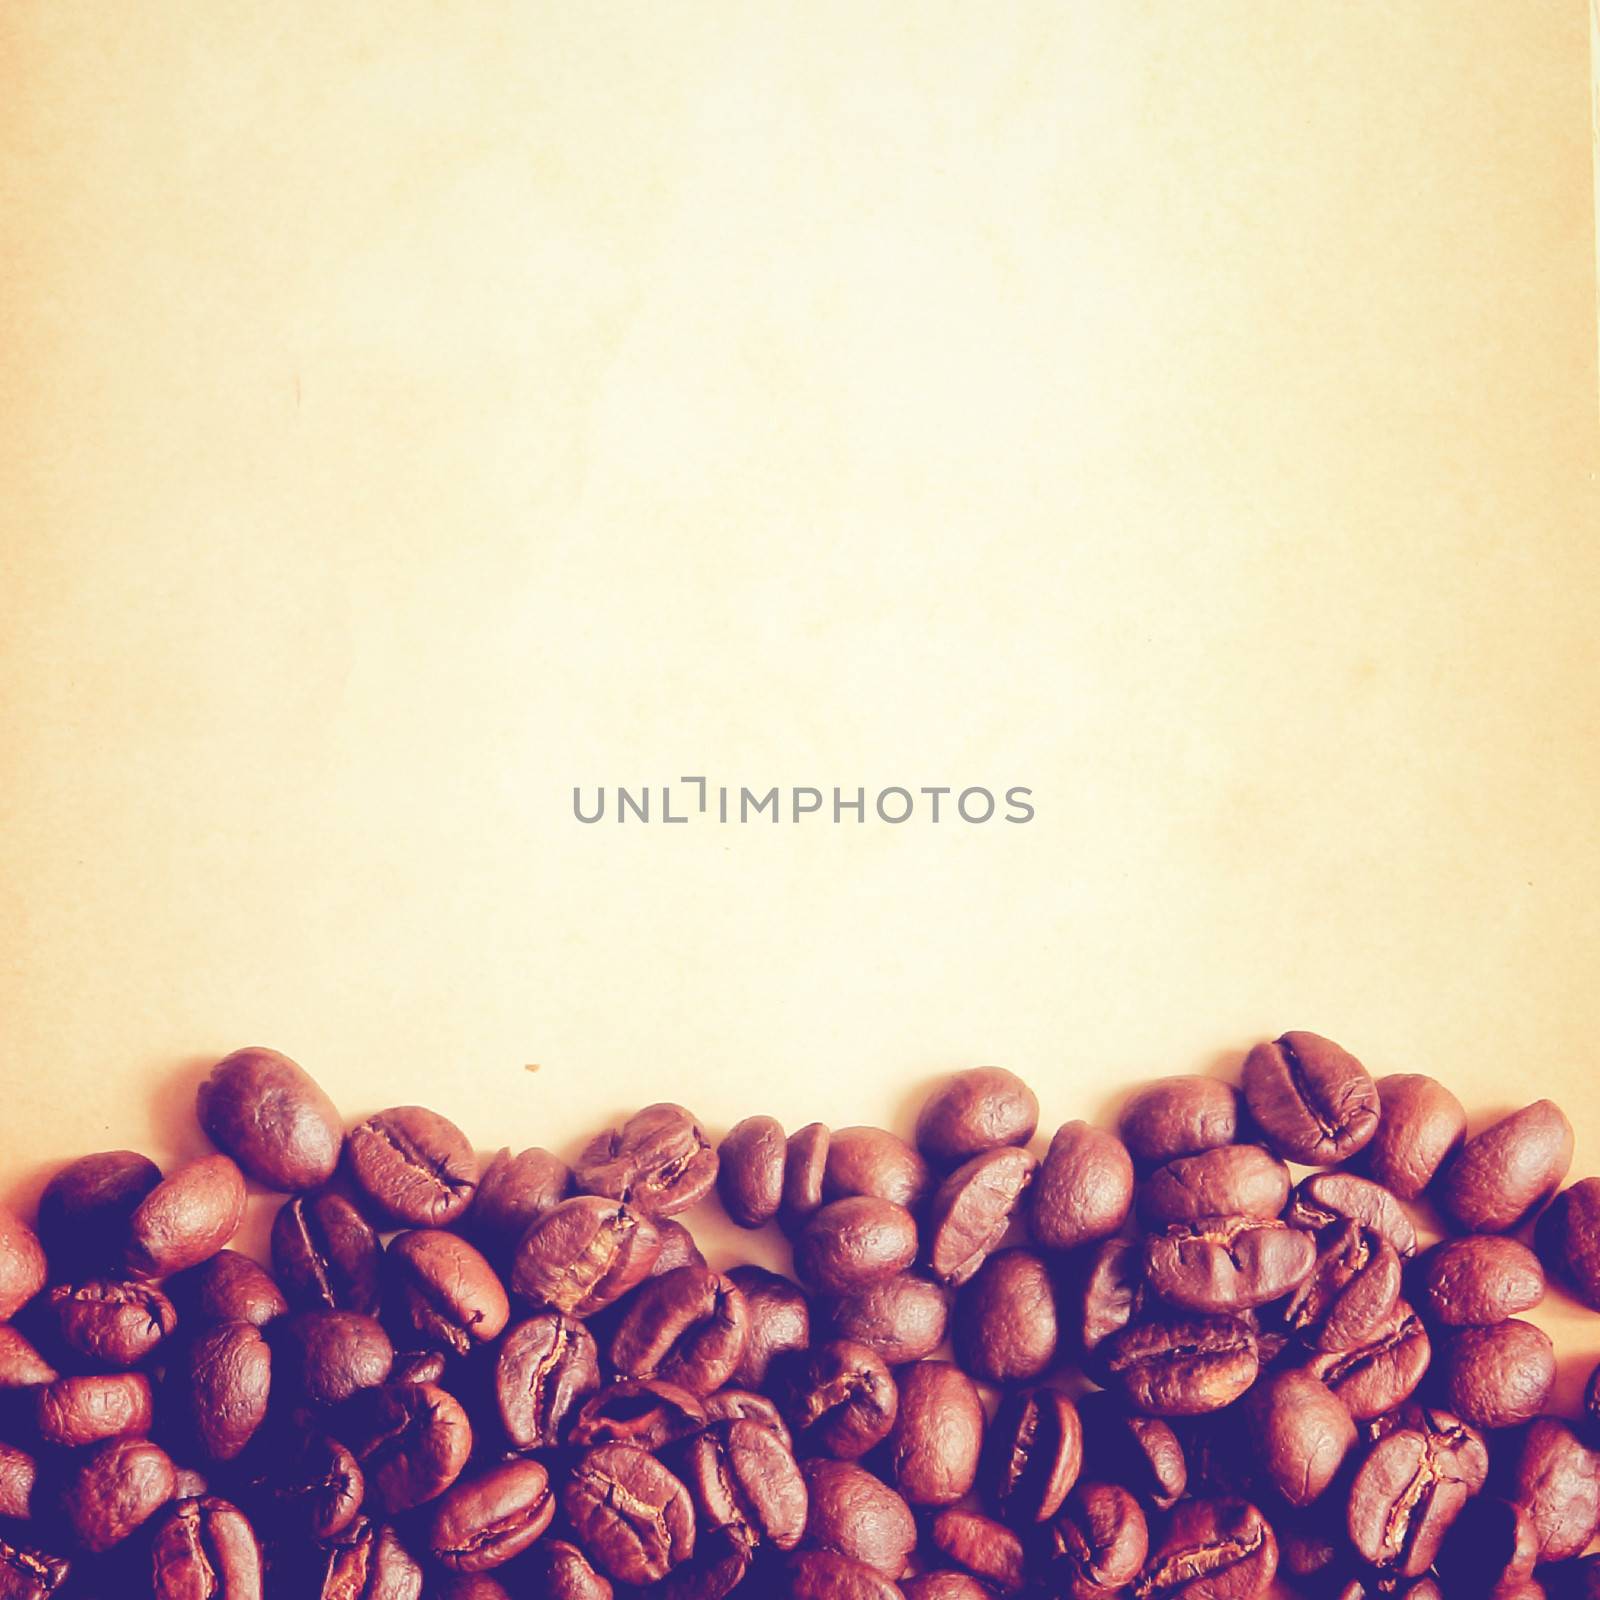 Coffee beans on old paper background with retro filter effect